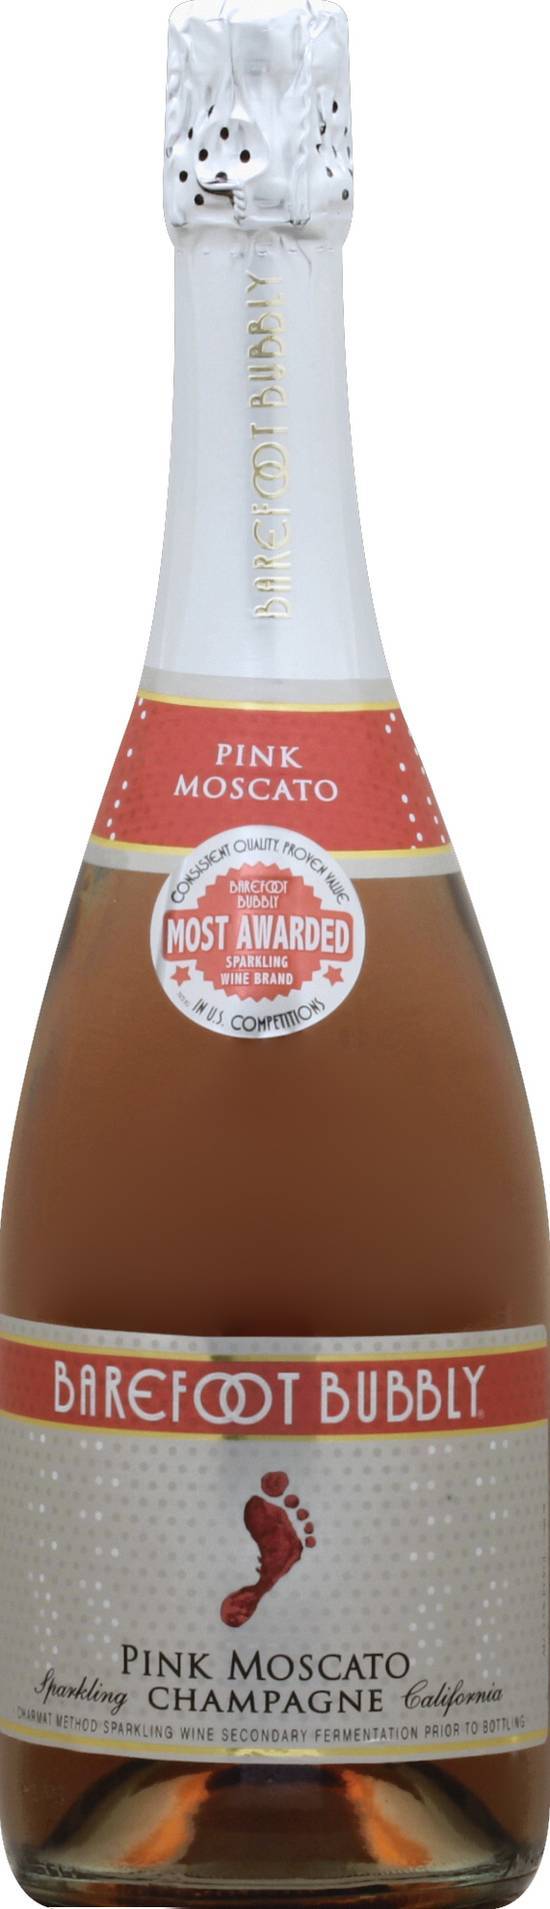 Barefoot Bubbly Pink Moscato Sparkling Champagne Wine (750 ml)